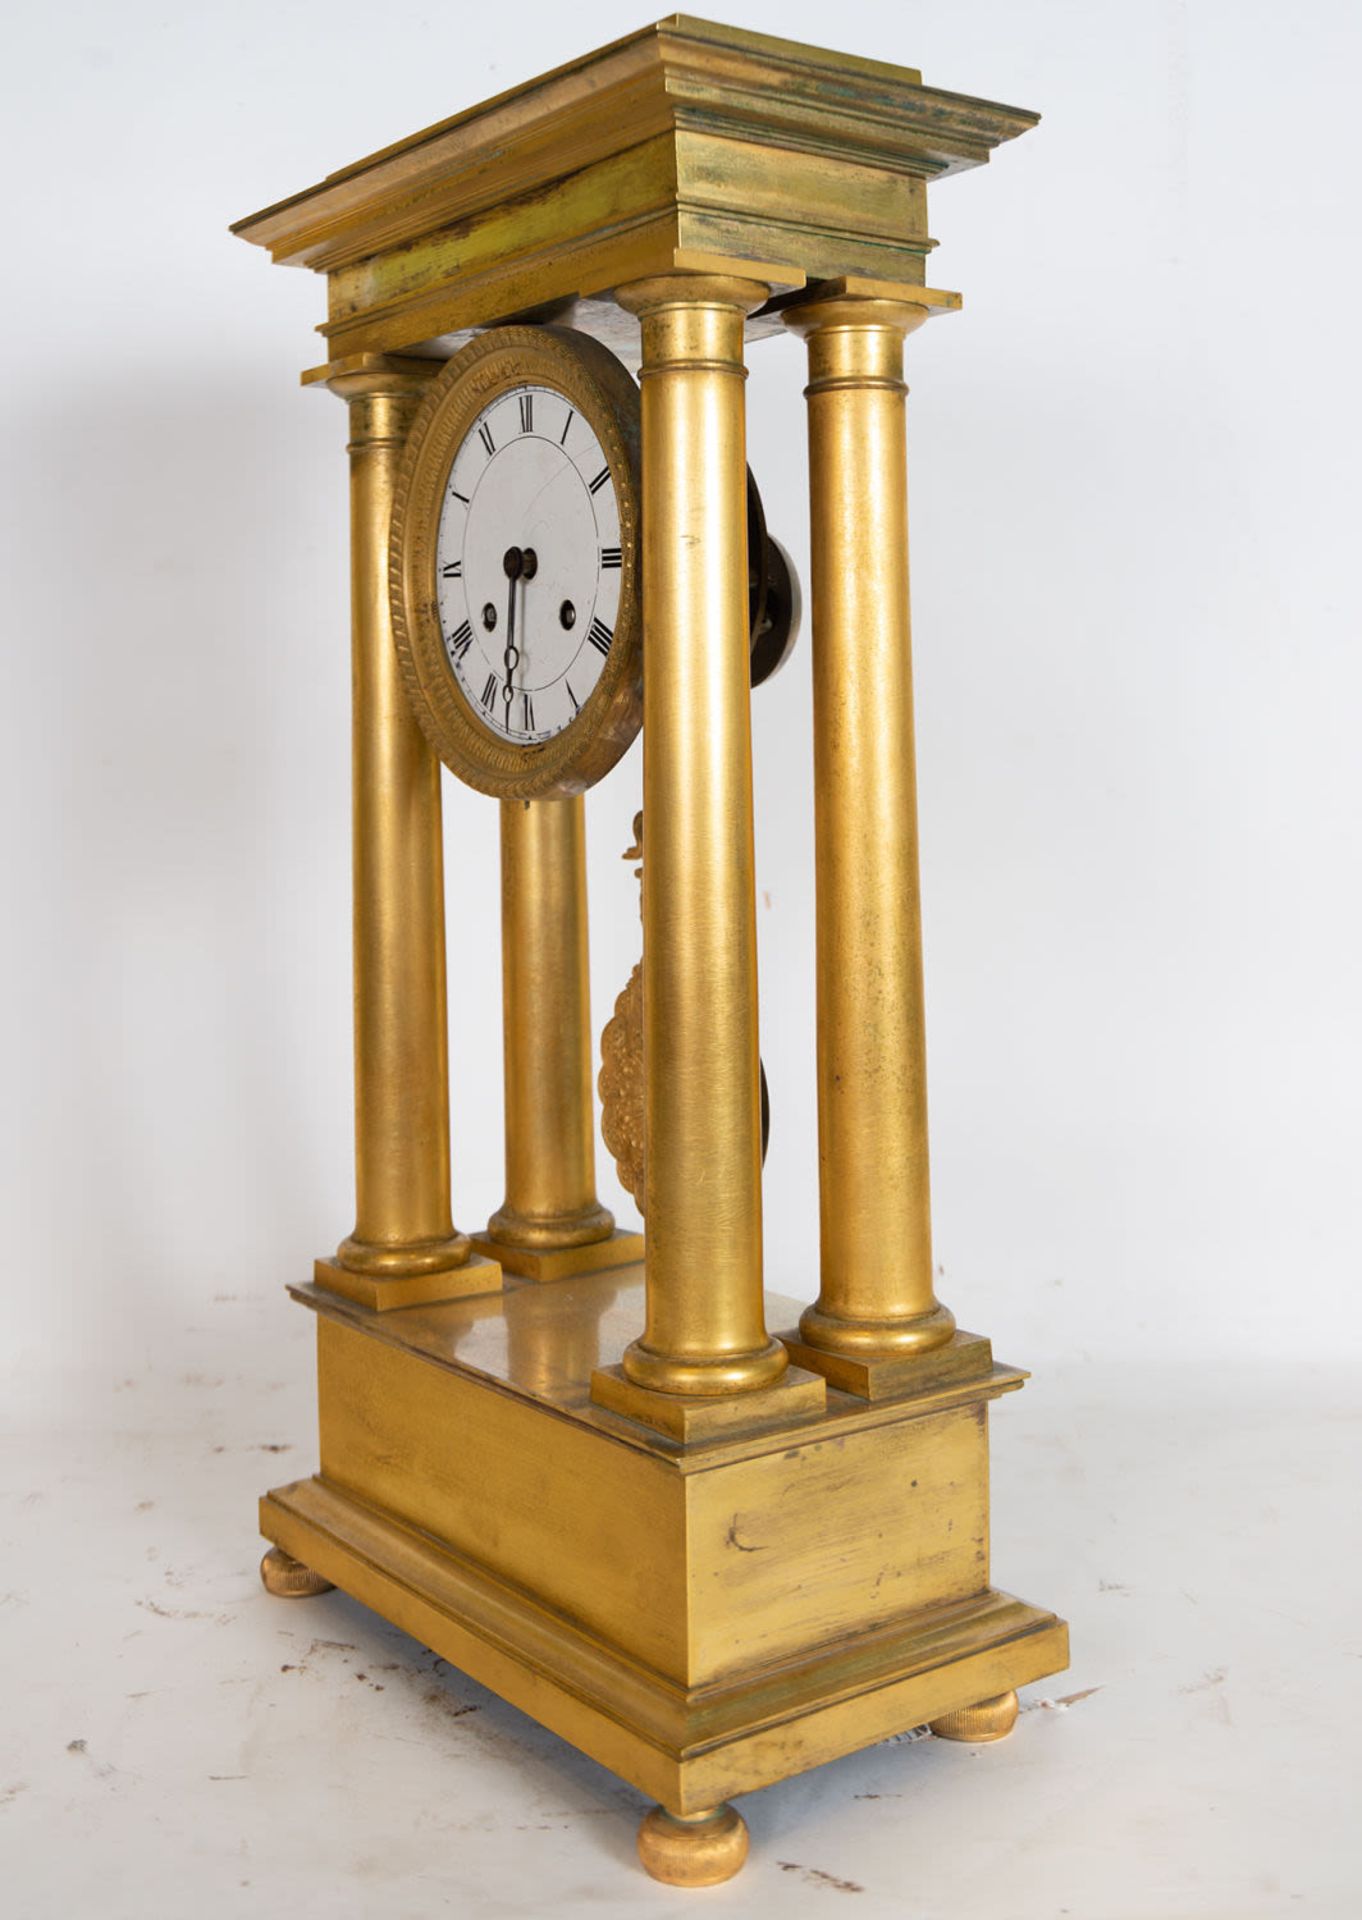 Large Bronze Clock in the shape of a Shrine with columns, French school of the 19th century - Image 2 of 5